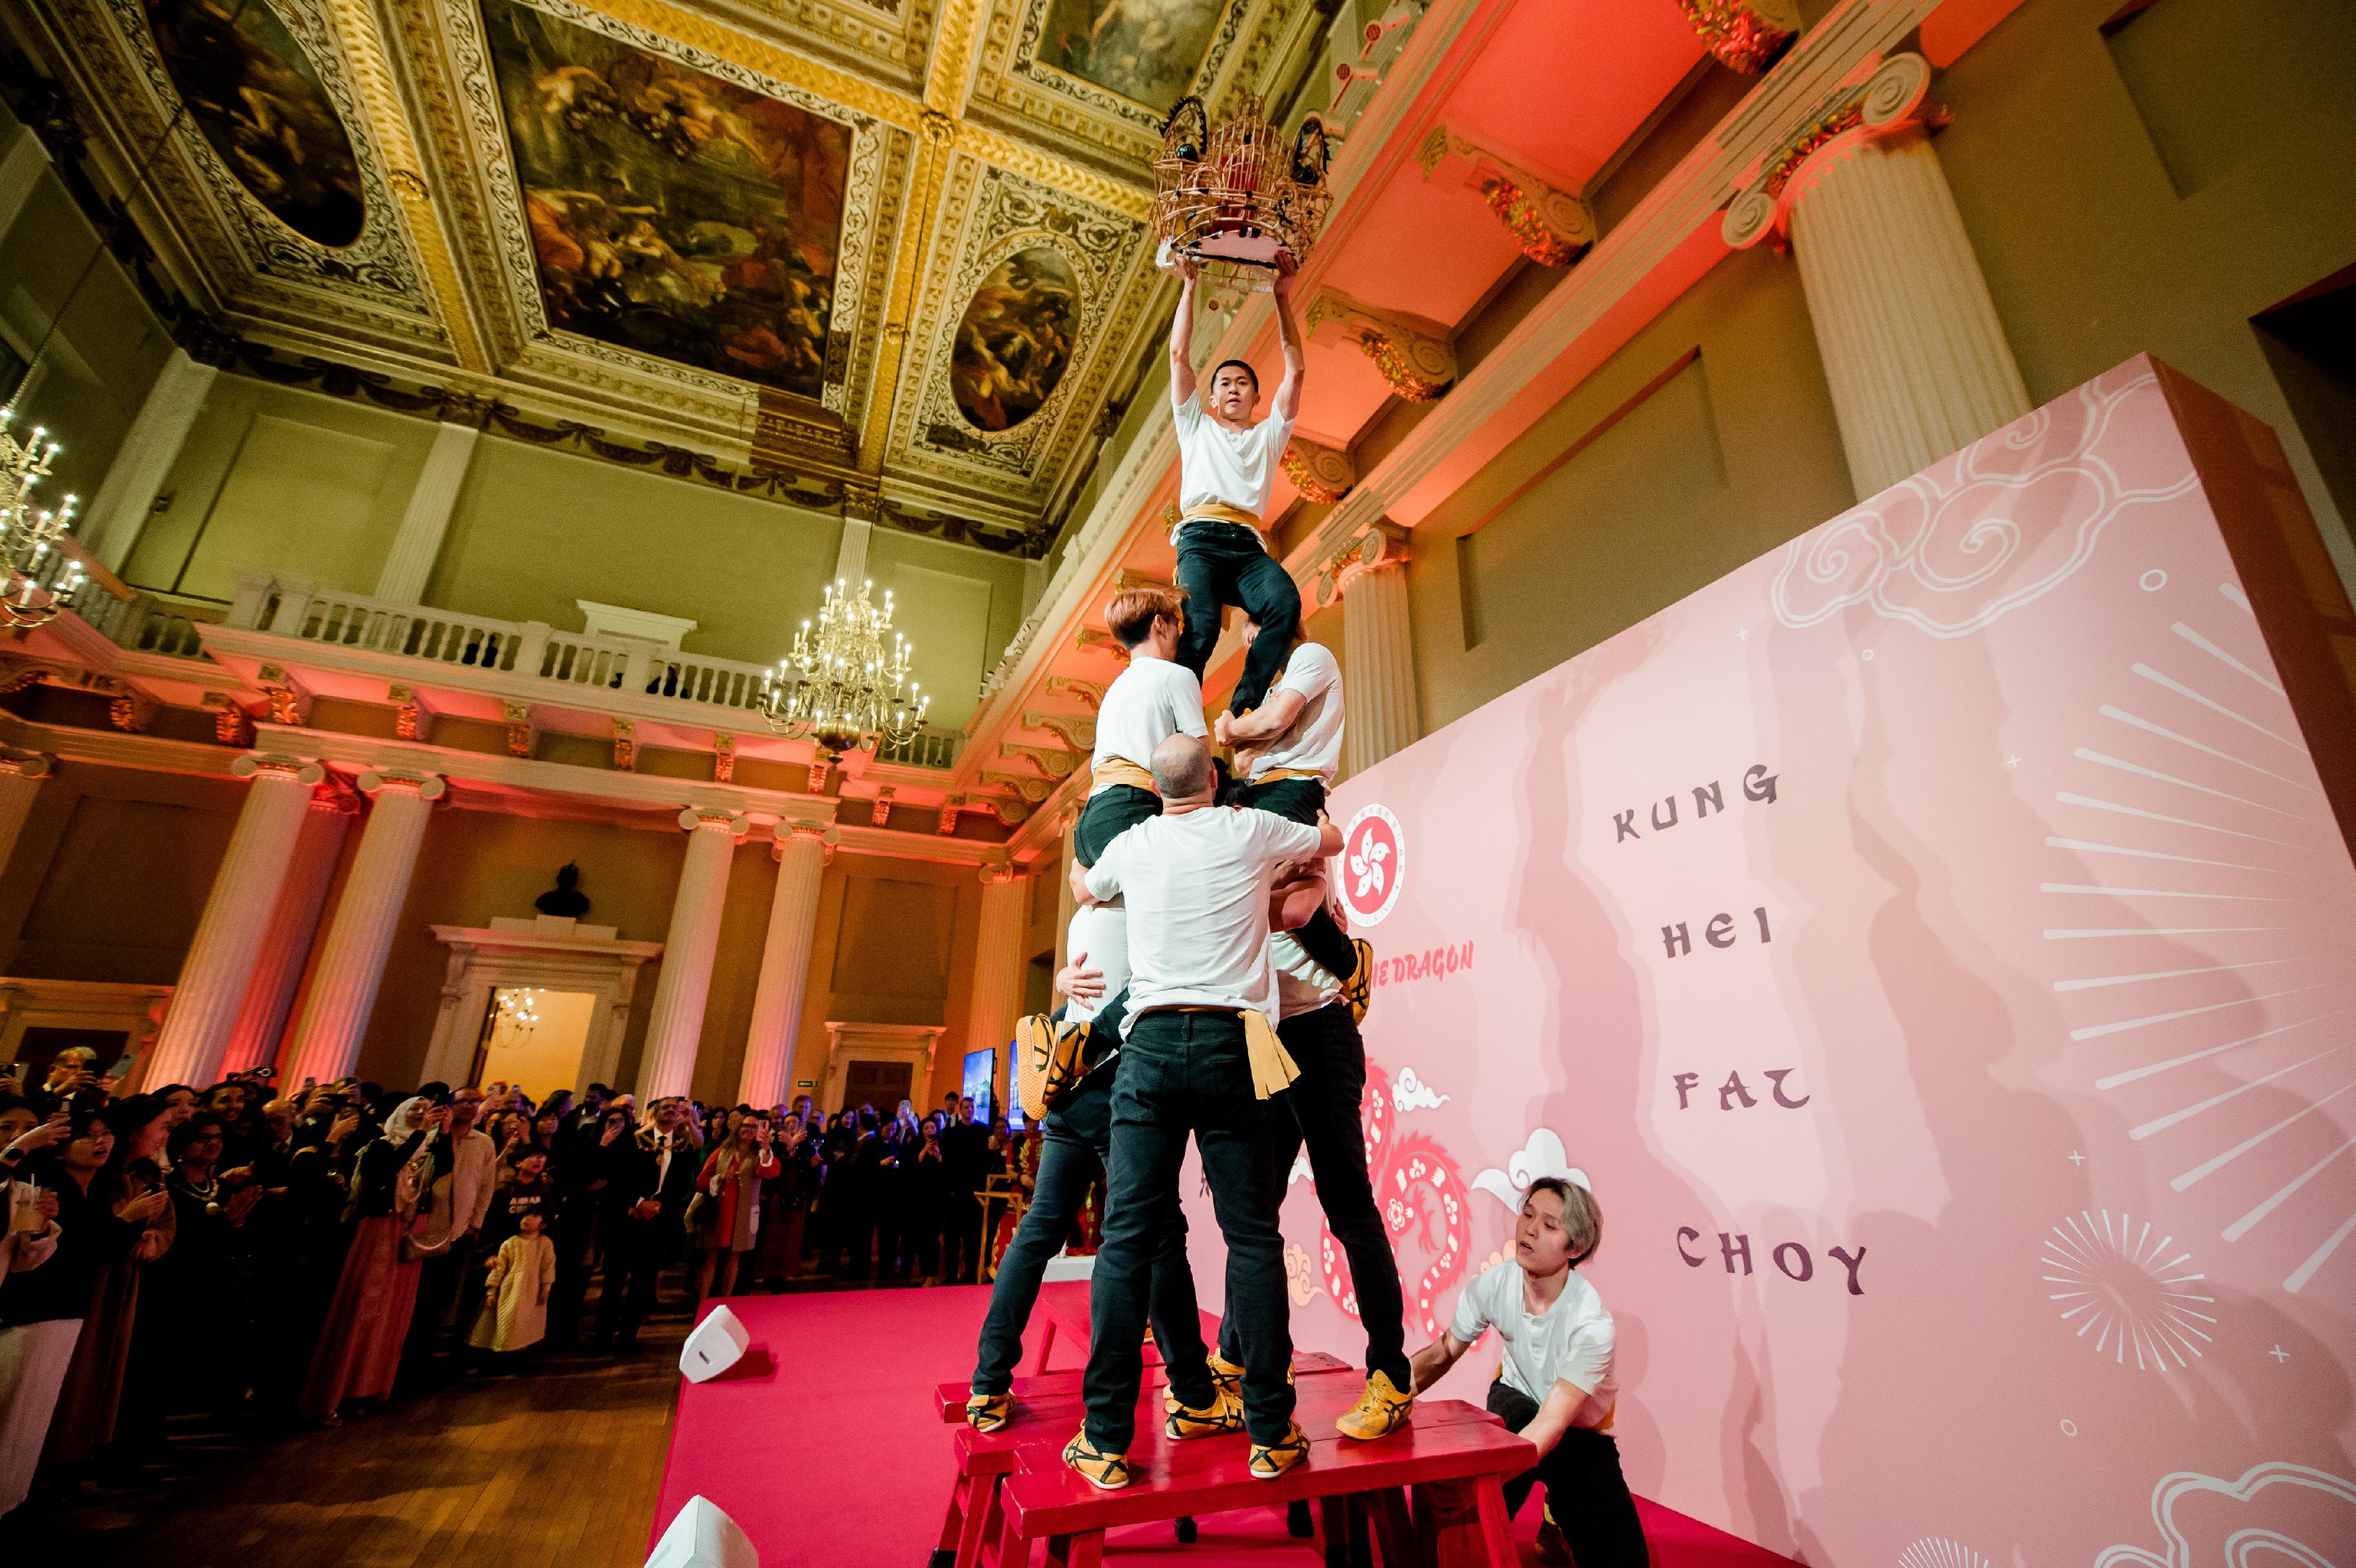 The Hong Kong Economic and Trade Office, London greeted the Year of the Dragon in the United Kingdom by hosting a celebratory reception at Banqueting House, Whitehall, in London on February 13 (London time). Photo shows the Hong Kong contemporary lion dance group TS Crew performing at the reception.